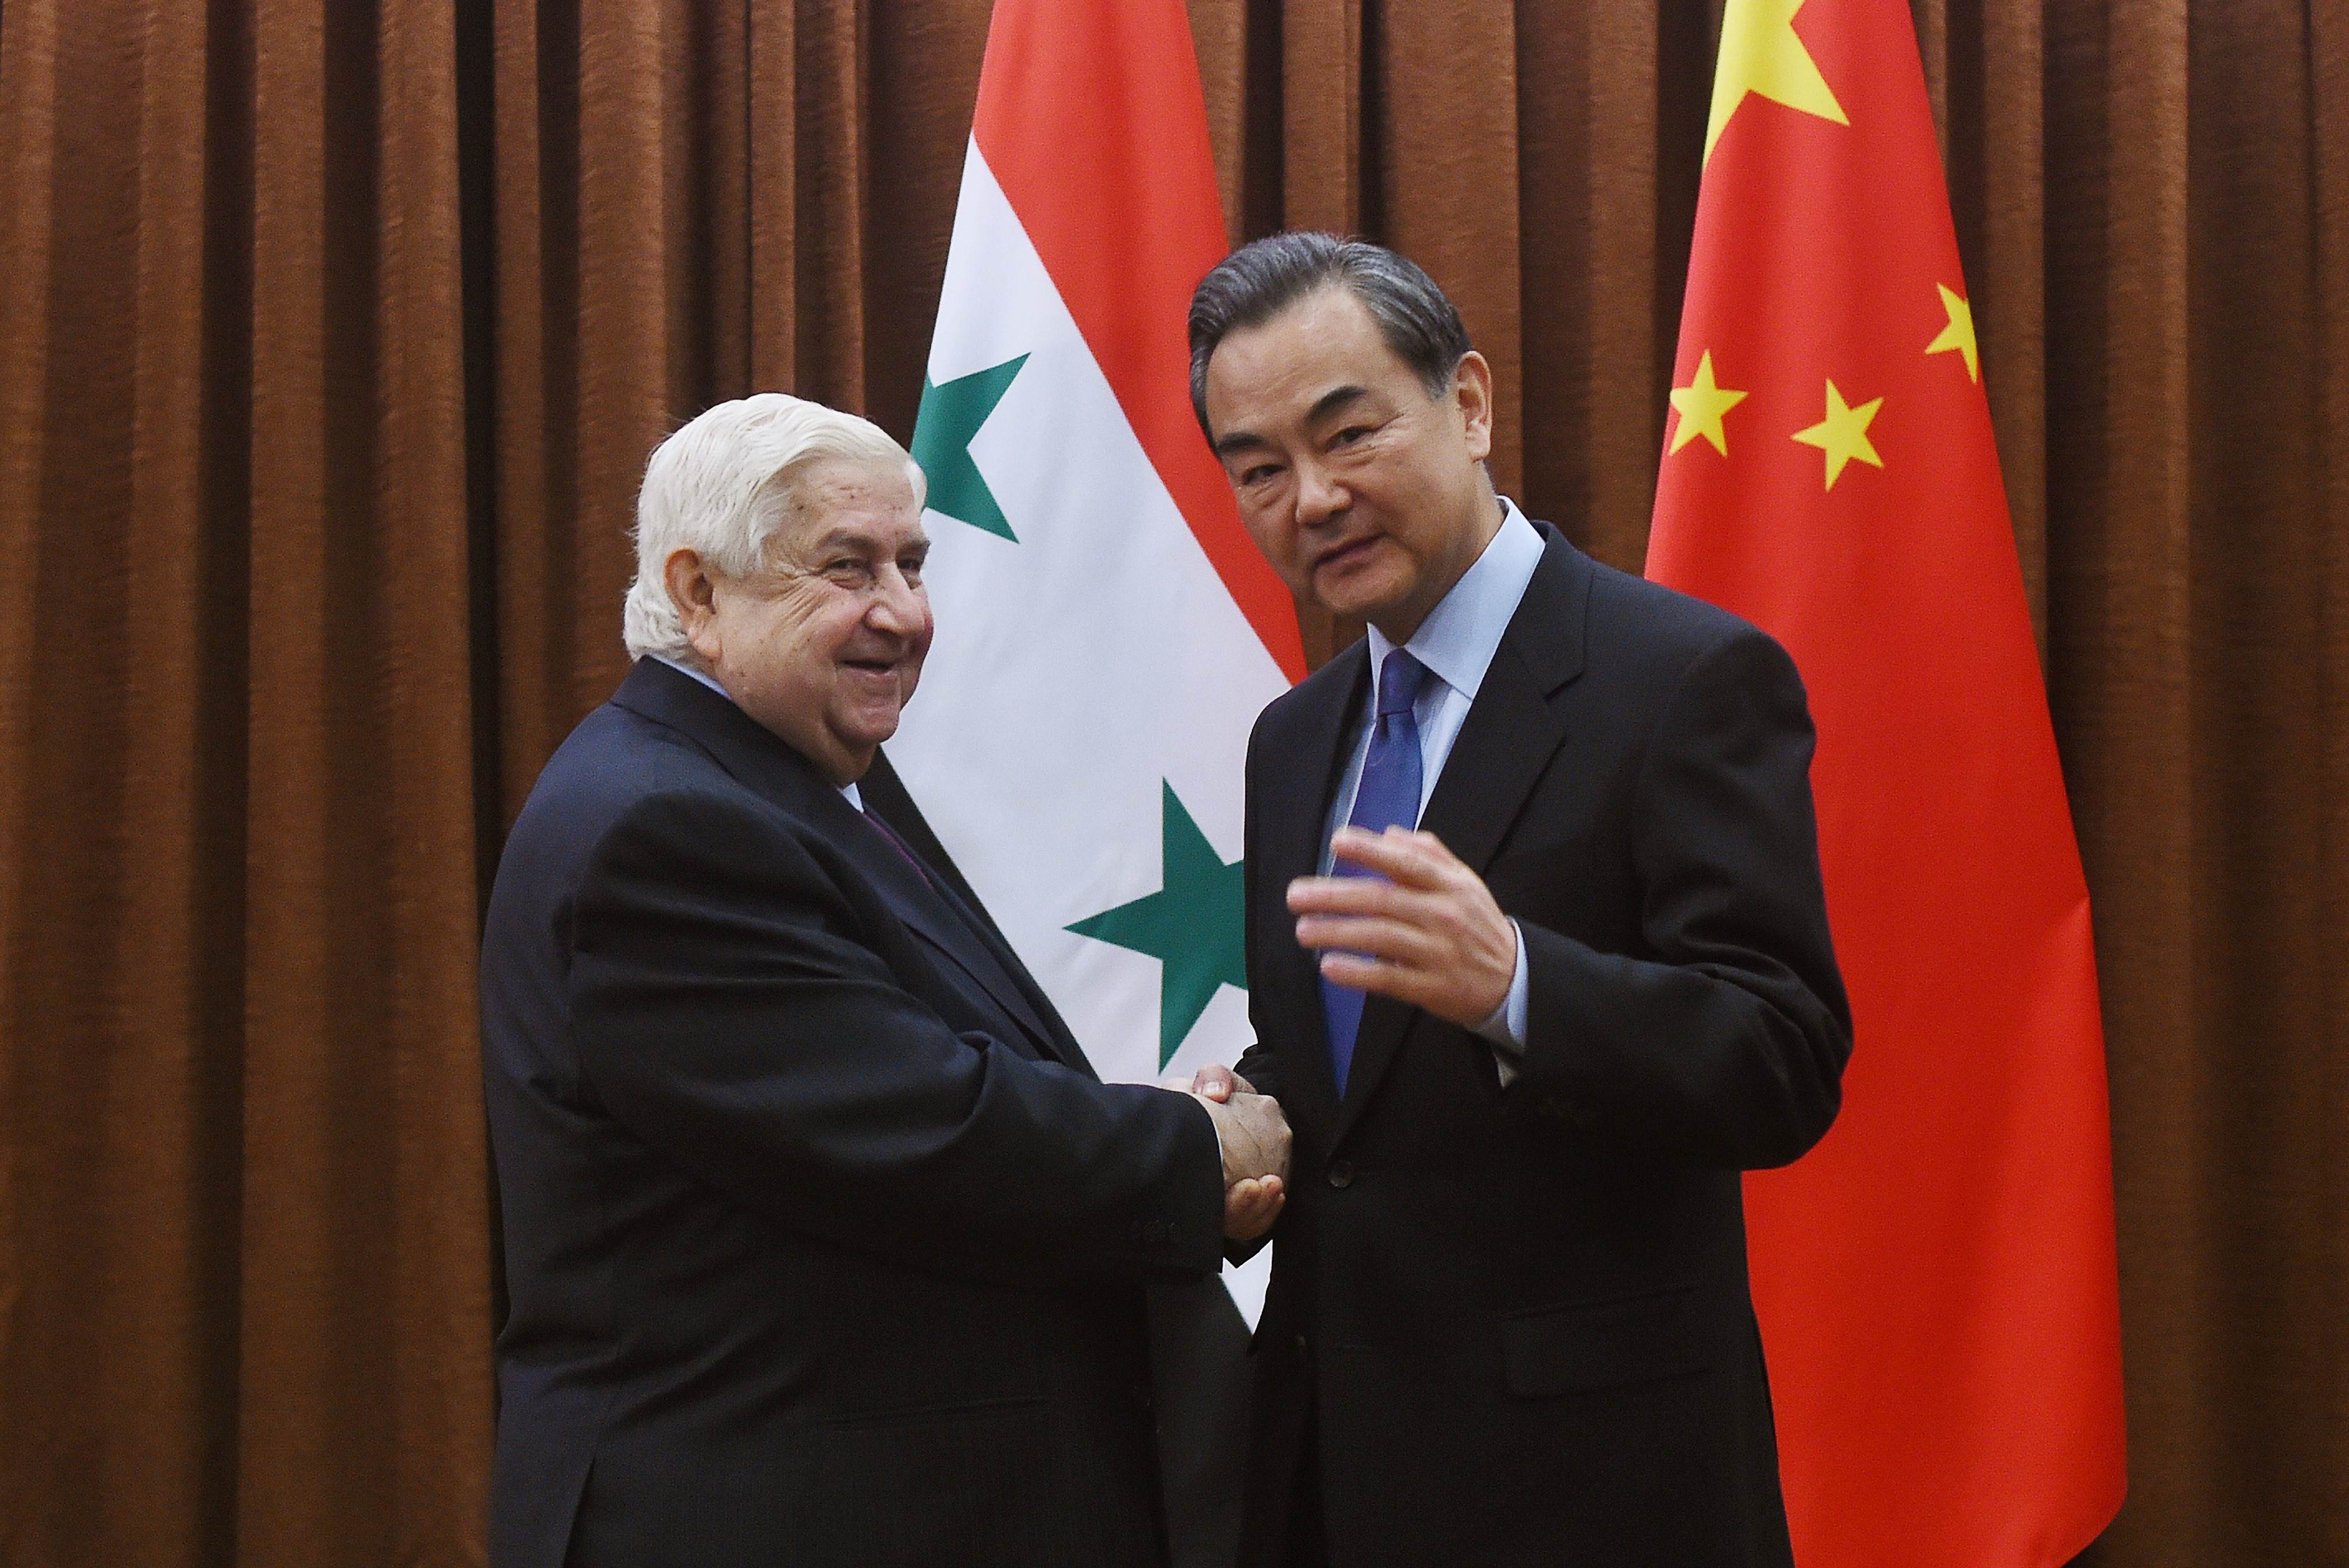 Syrian Foreign Minister Walid Muallem (L) is welcomed by Chinese Foreign Minister Wang Yi before a meeting in Beijing on December 24, 2015. Muallem is on a visit to China from December 23 to 26. AFP PHOTO / WANG ZHAO